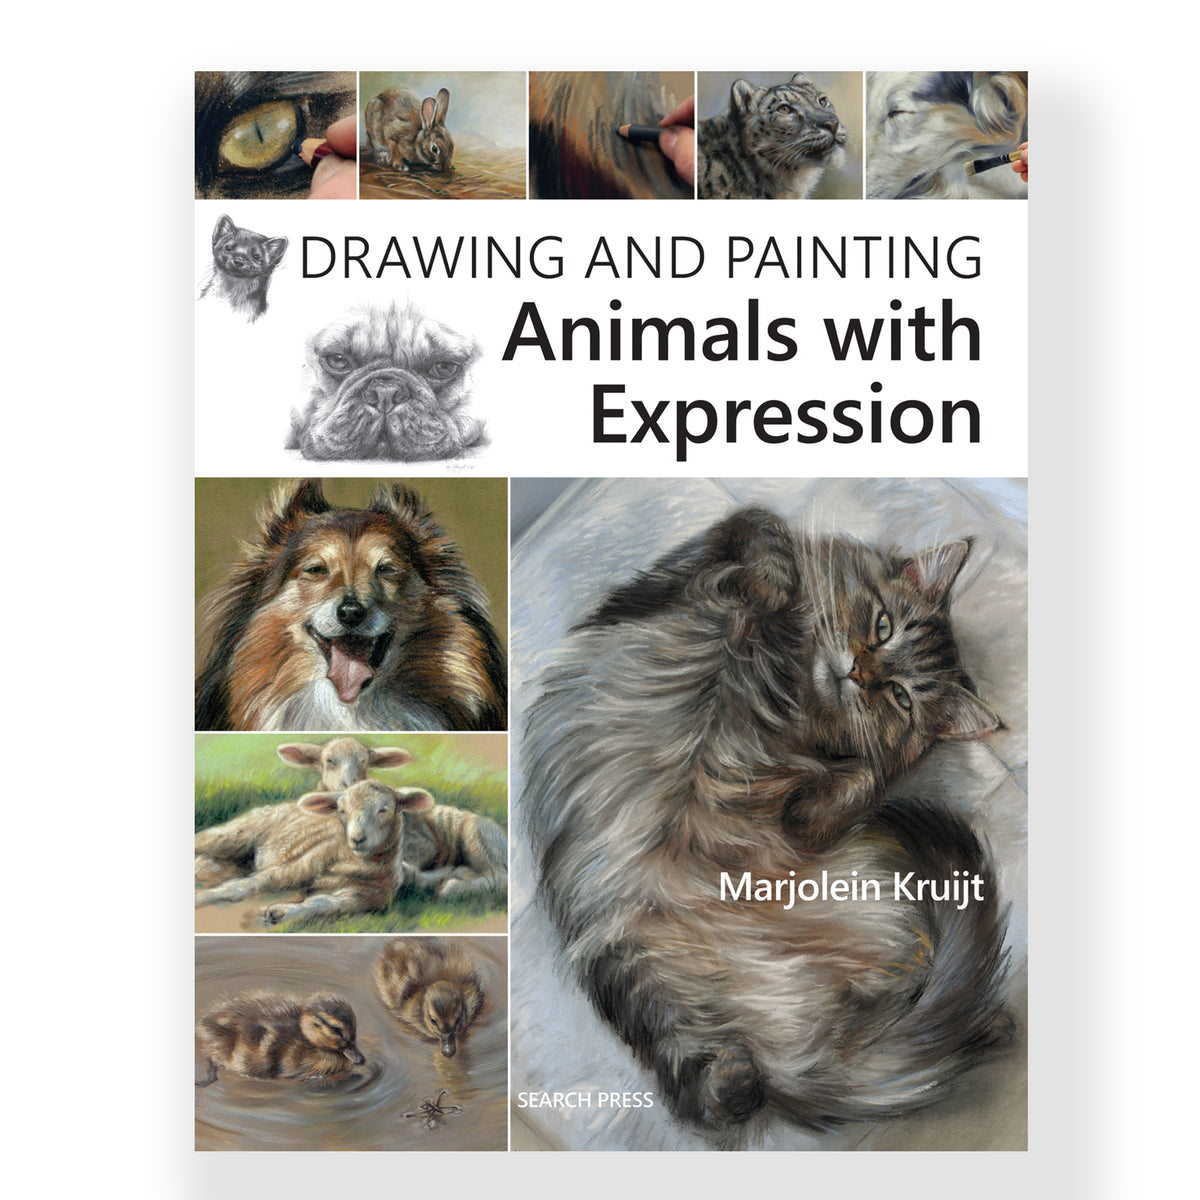 Drawing and Painting Animals with Expression - M. Kruijt